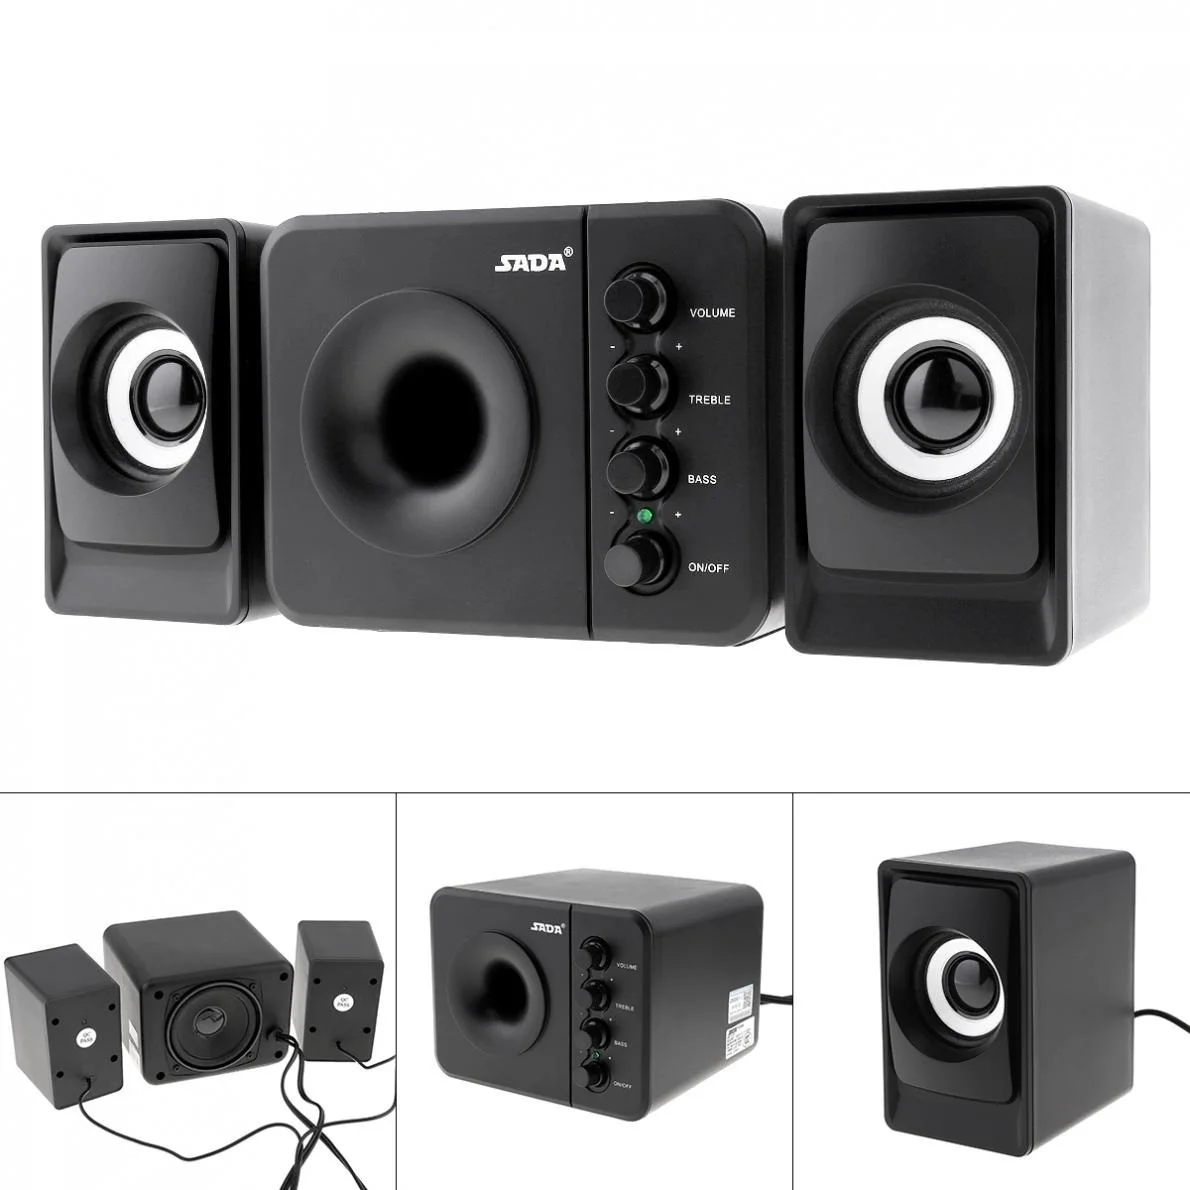 

New D-205 USB2.0 Subwoofer Computer Speaker with 3.5mm Audio Plug and USB Power Plug for Desktop PC Laptop MP3 Cellphone MP4